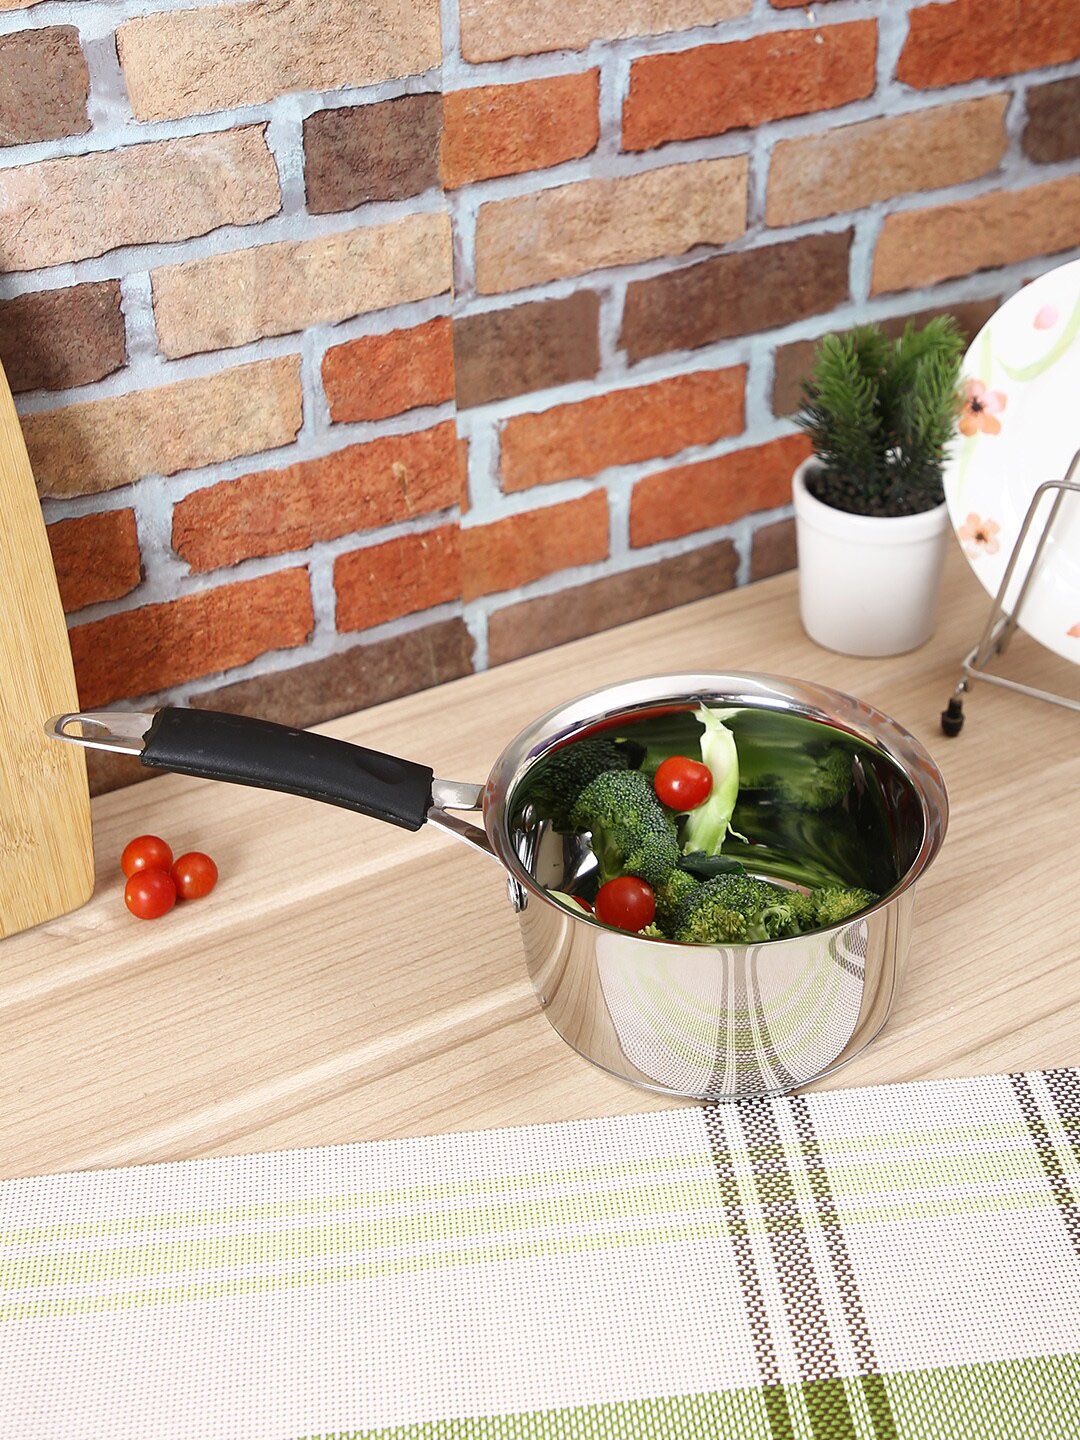 AURUM Silver-Toned Stainless Steel Sauce Pan Price in India